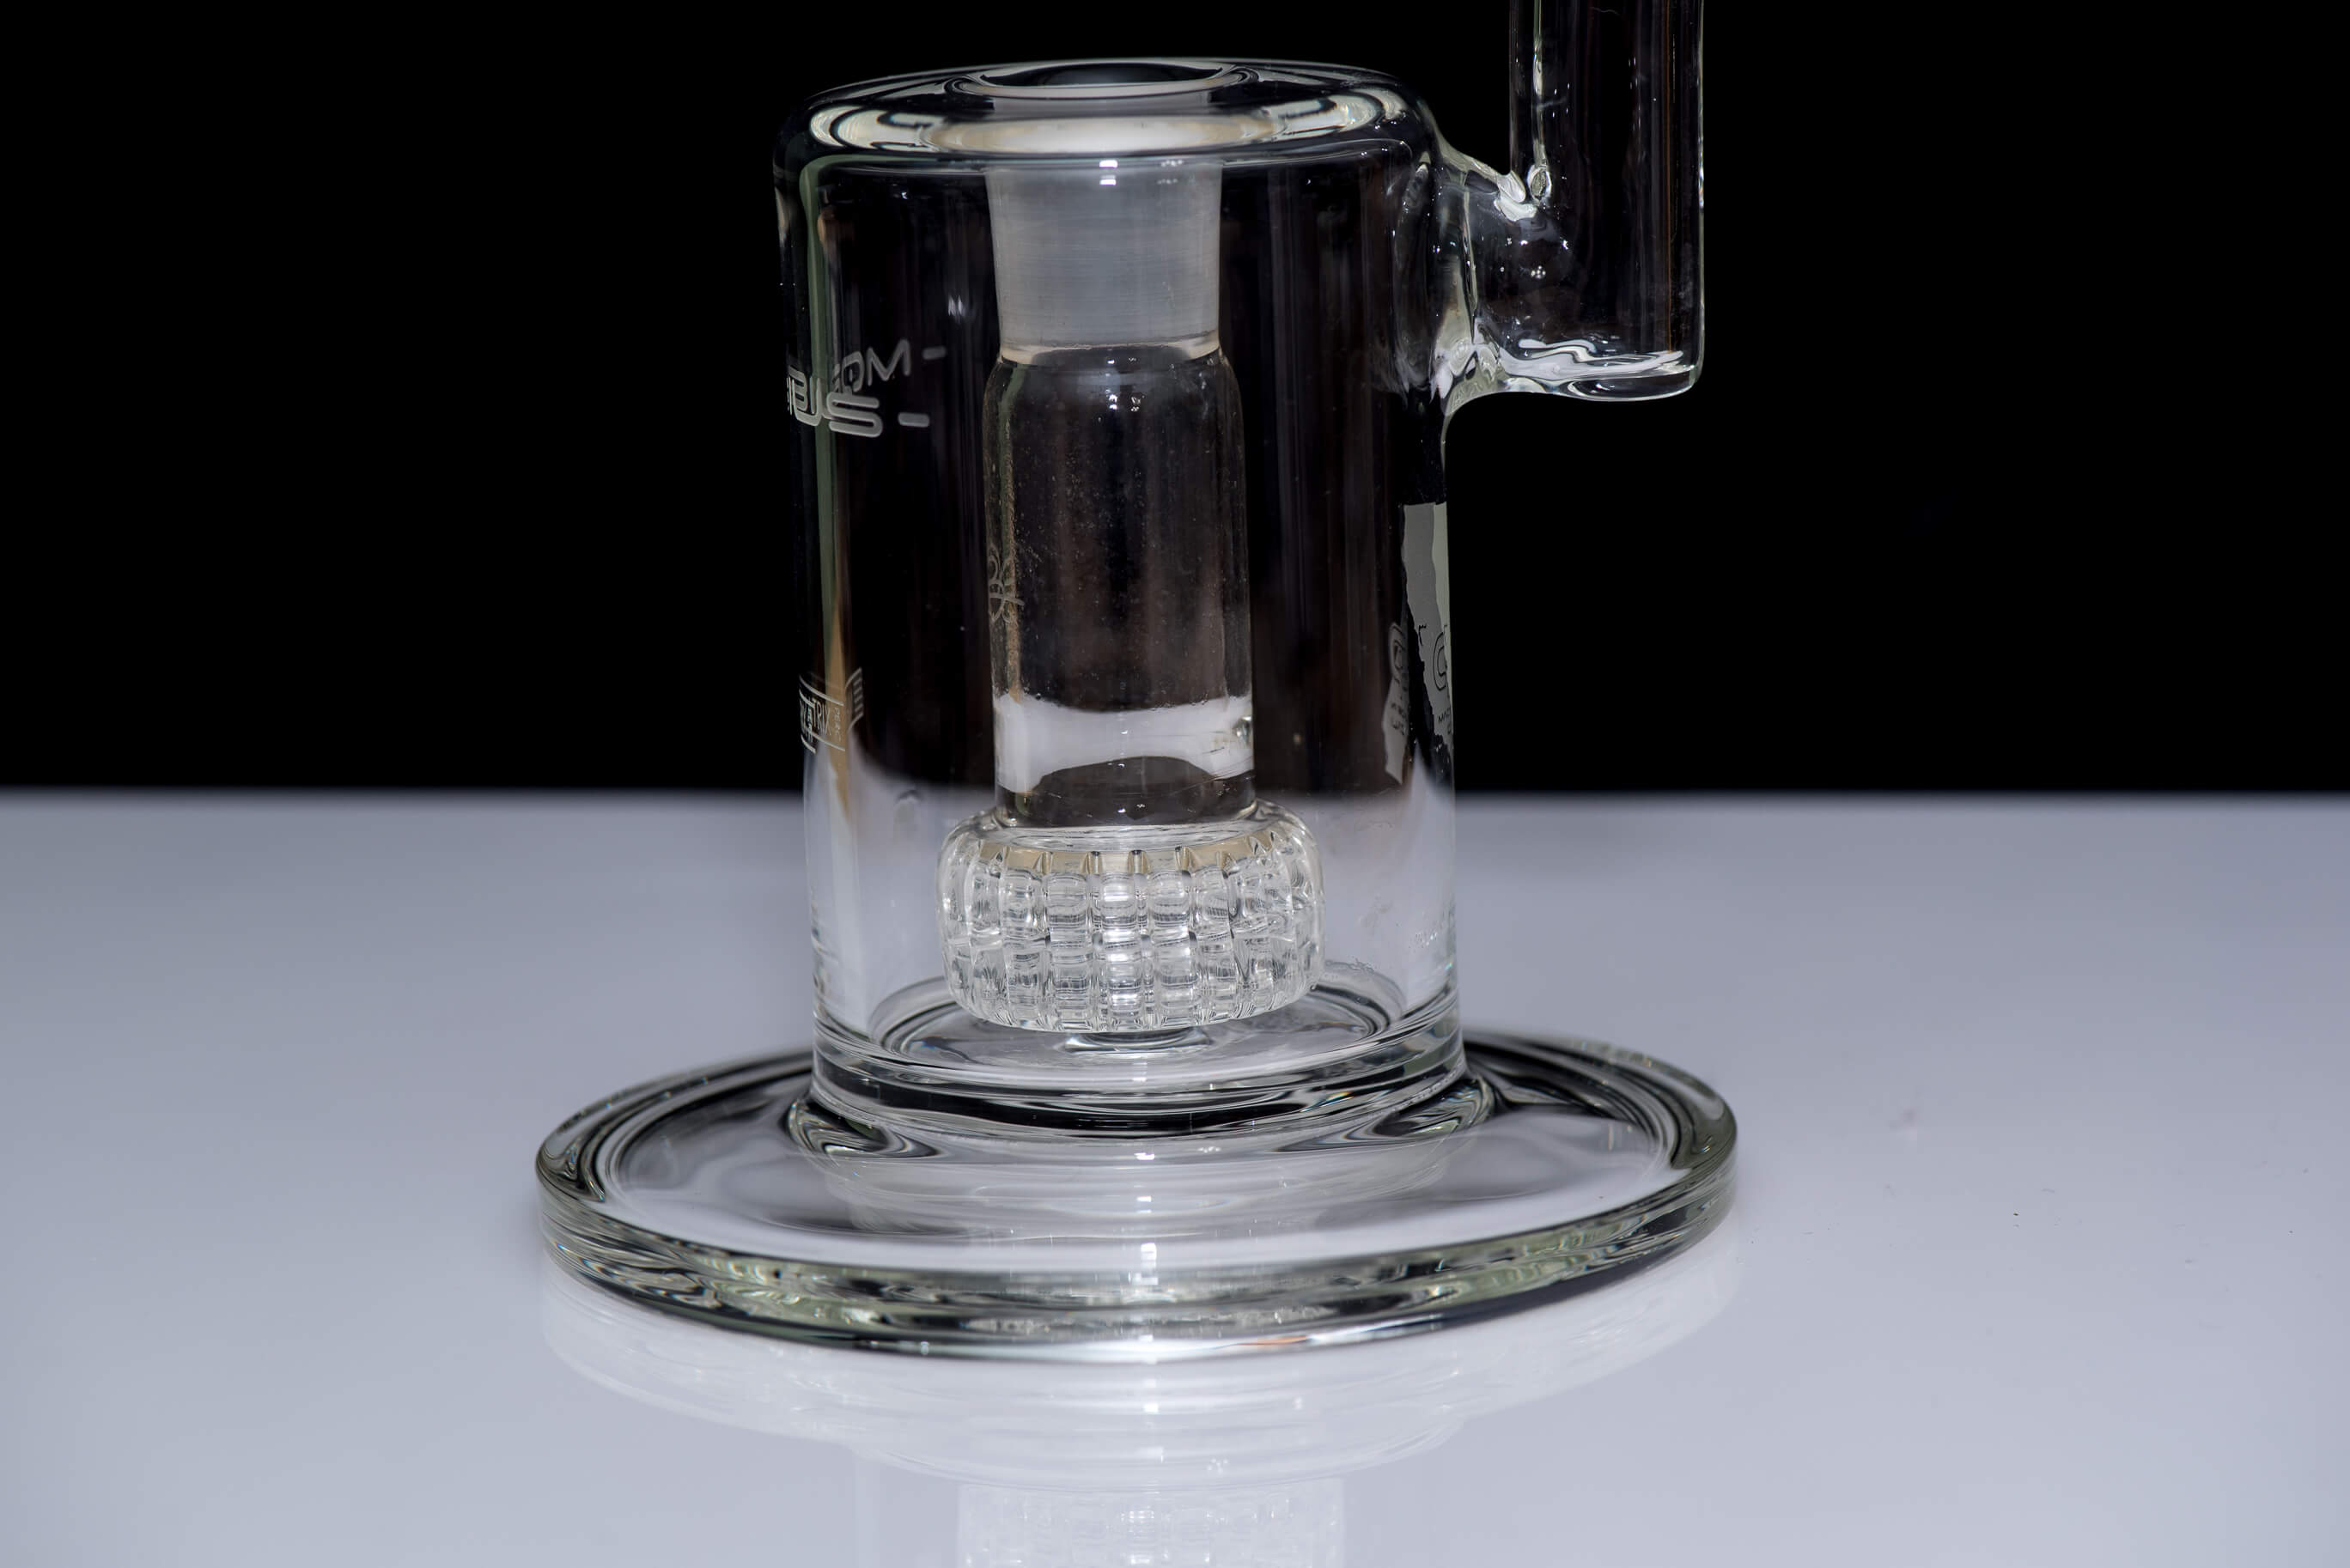 TUTORIAL: How To *EASILY* Clean Your Glass Bong, Bubbler, and Water Pipes – A Quick Step-by-Step Guide